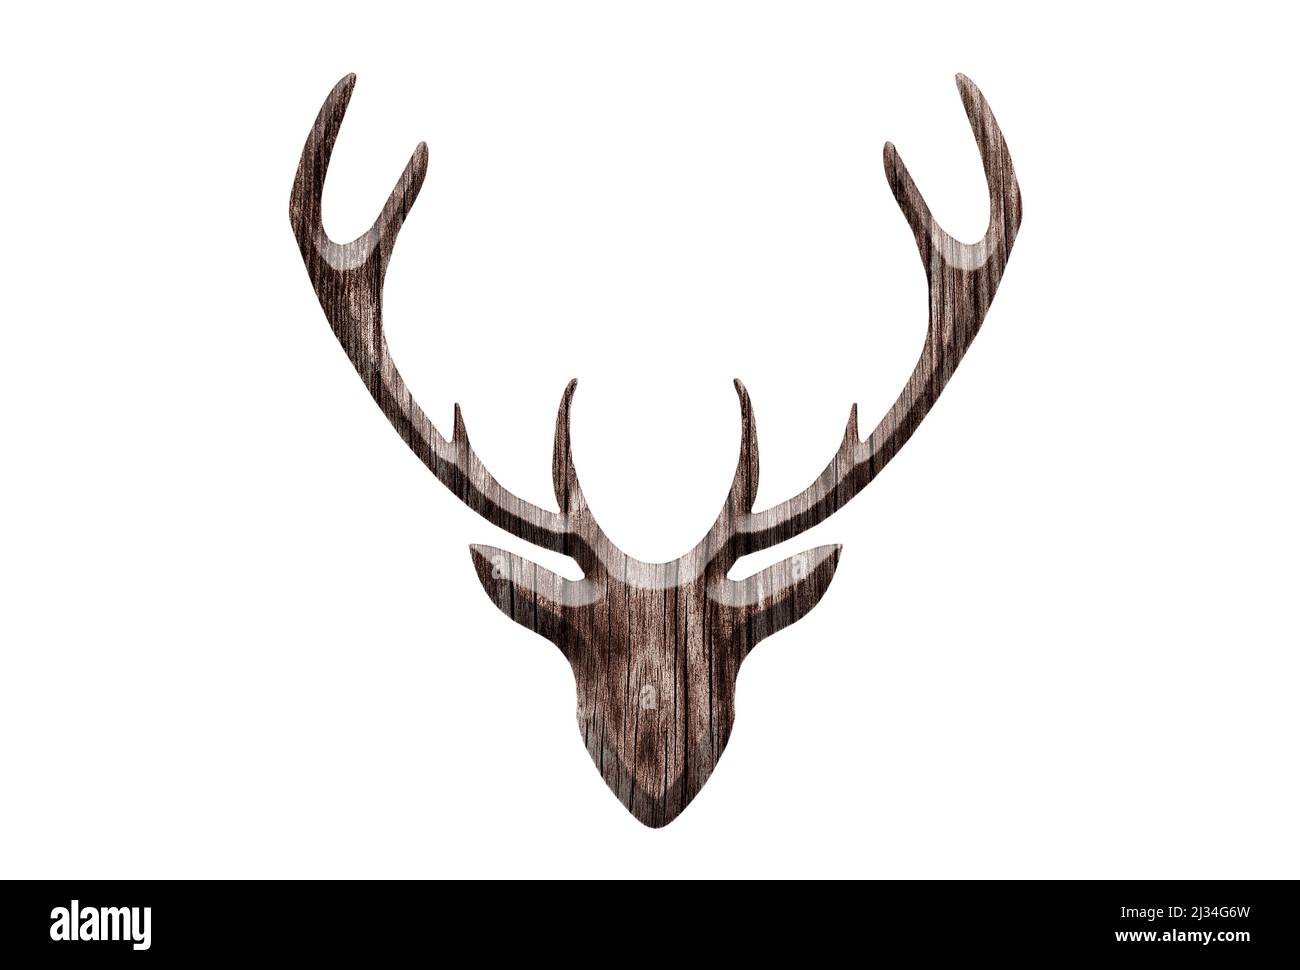 Wooden deer head shape isolated on white background Stock Photo